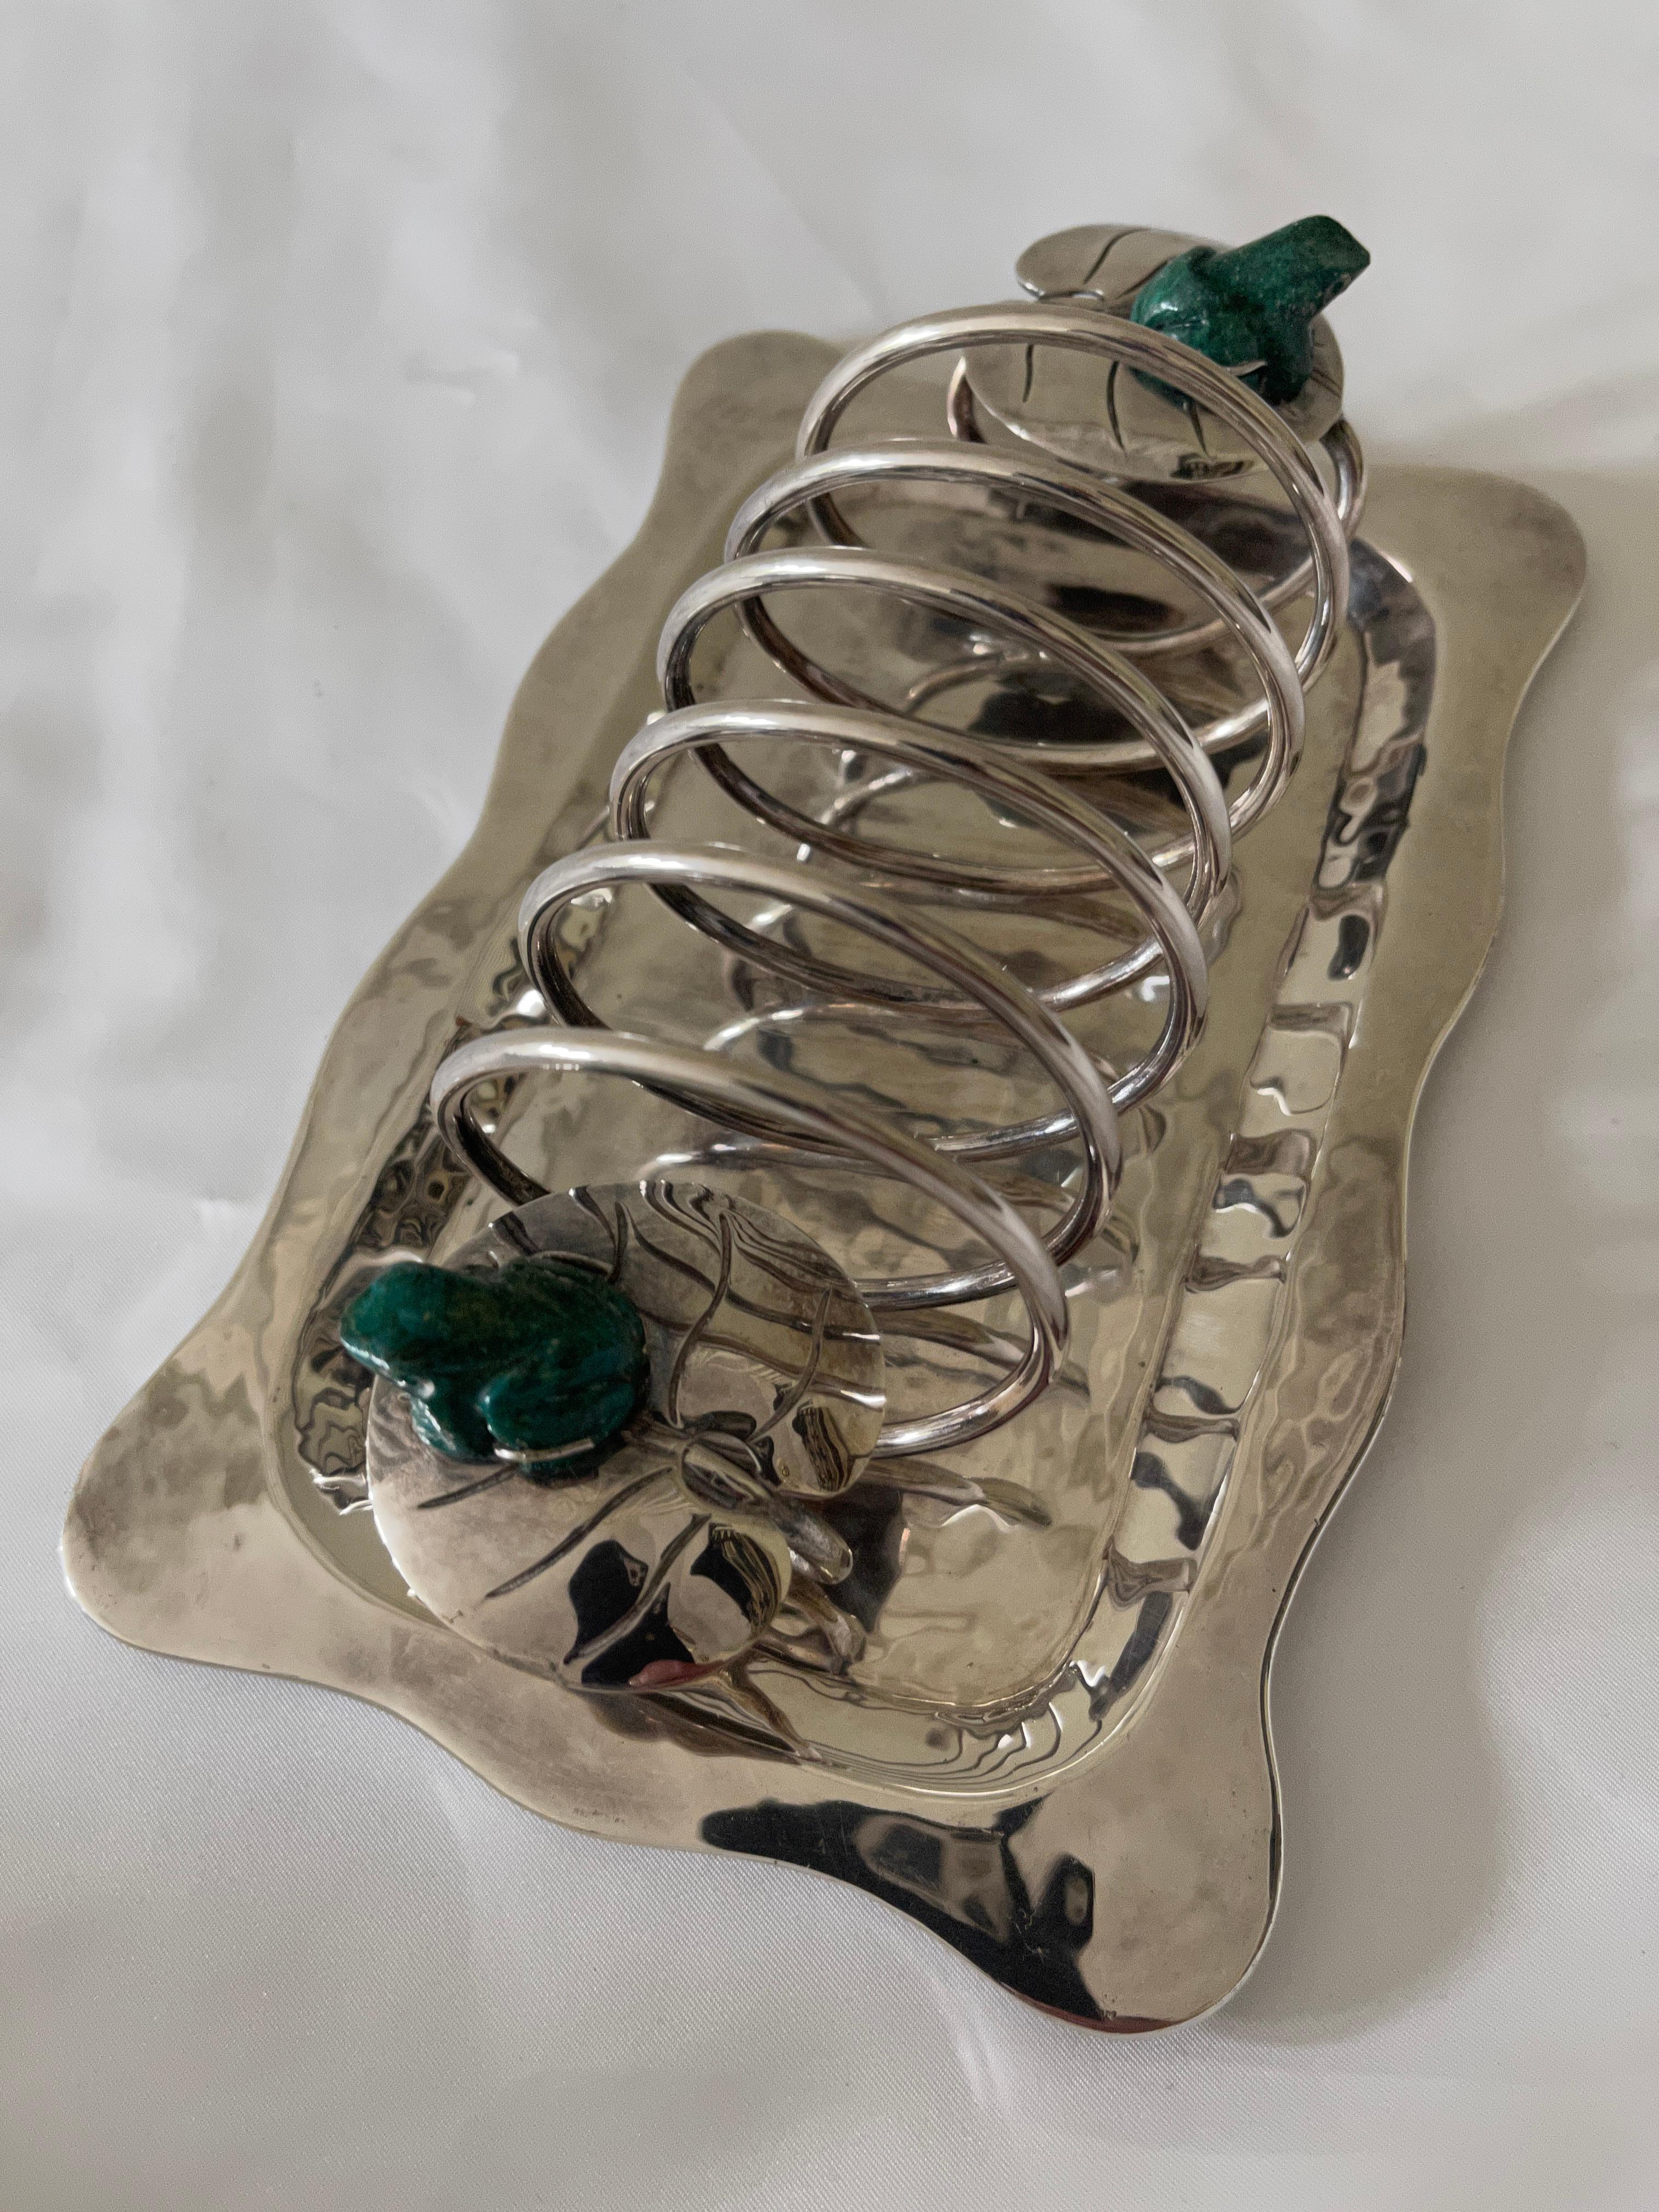 Hand-Carved Emilia Castillo Mexican Silver Plate Toast Rack with Malachite Frogs on Lily Pad